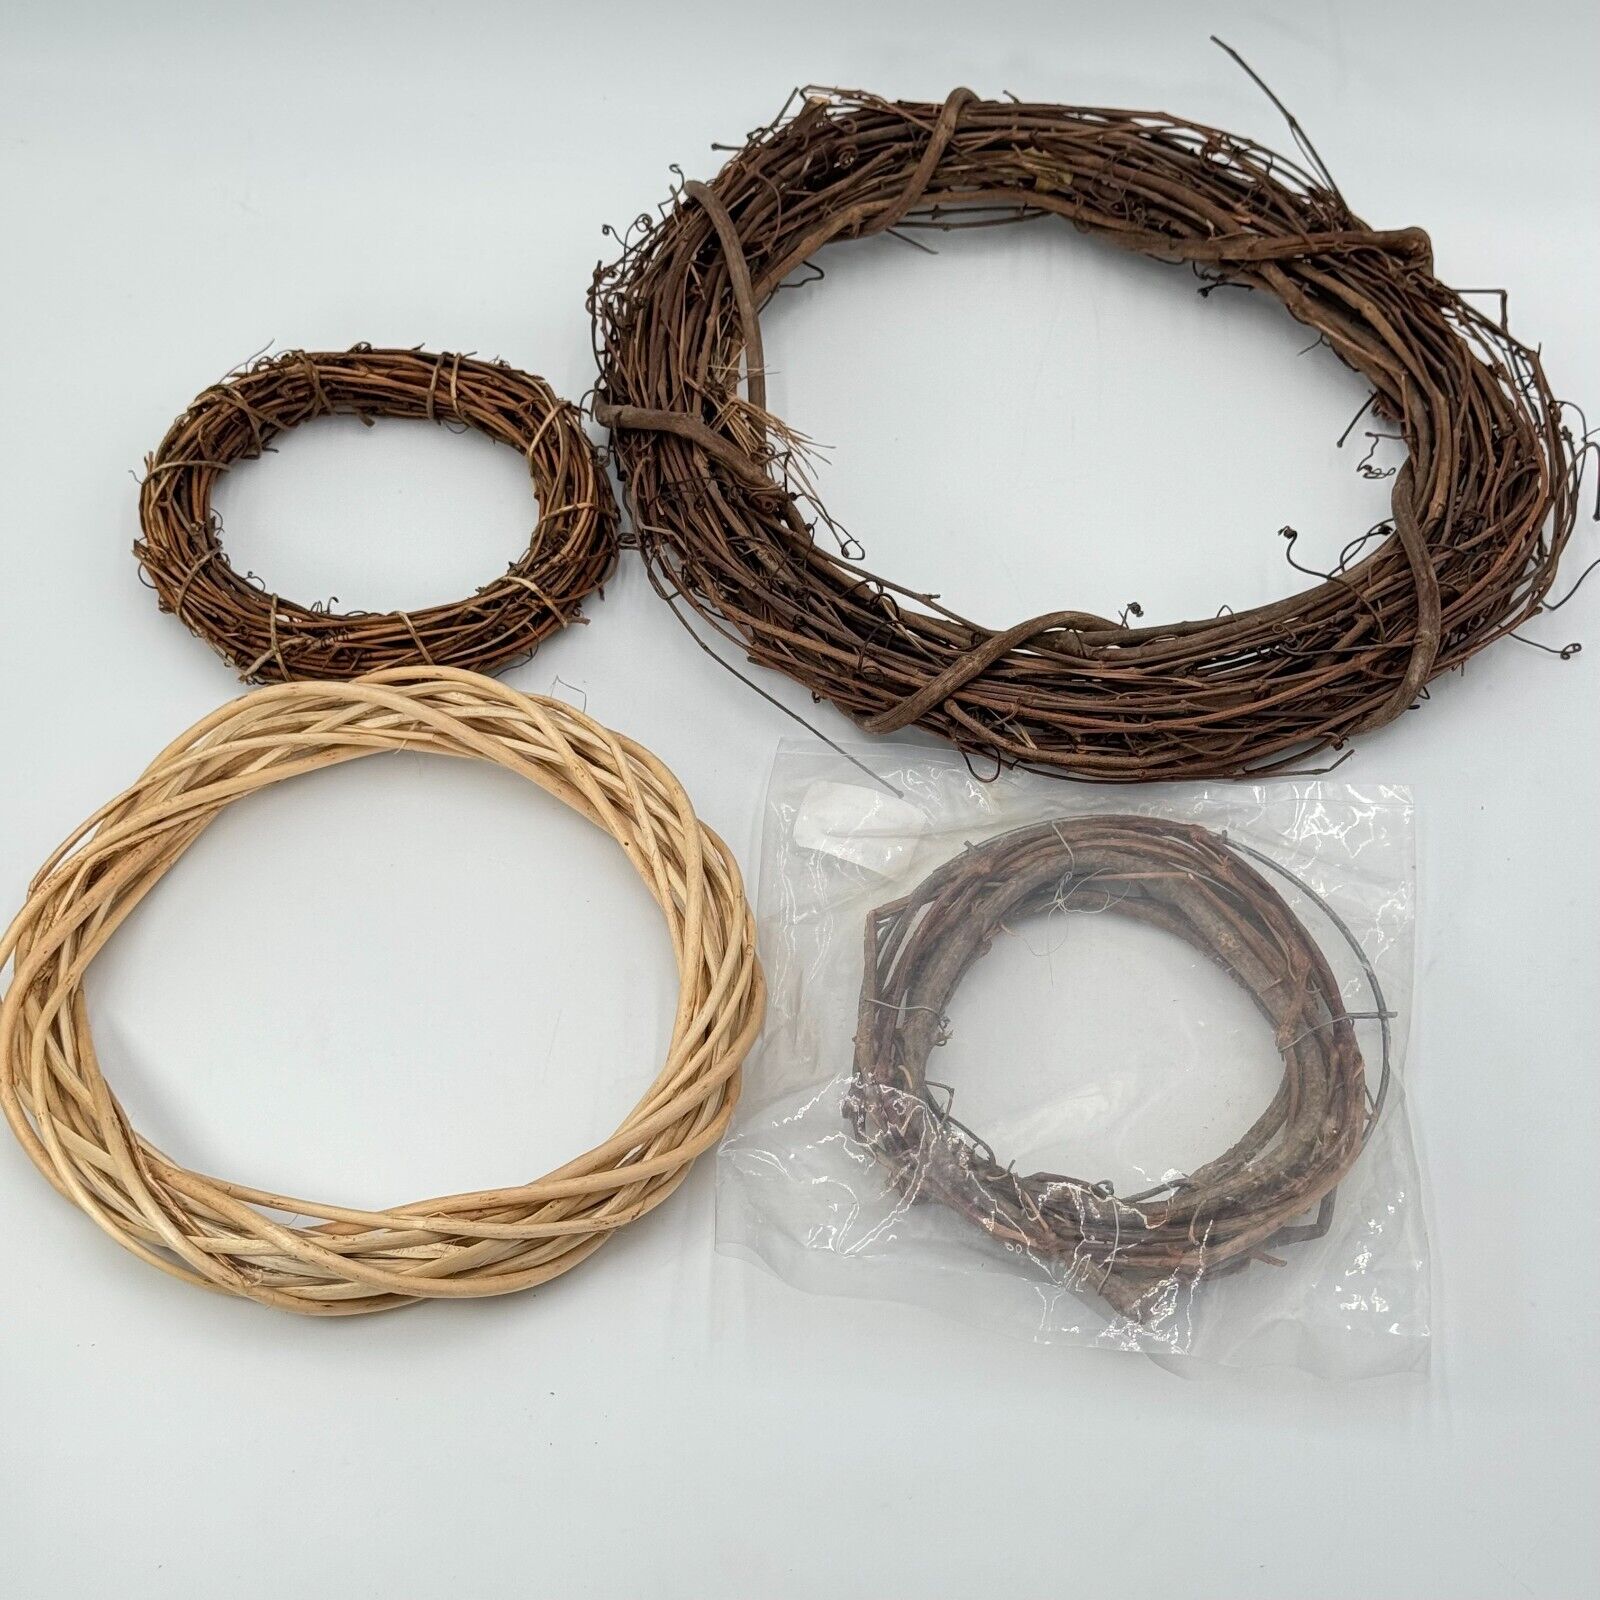 Set of 4 Assorted Plain Grapevine Wreaths 6-13in Art Holiday Craft Wall Decor